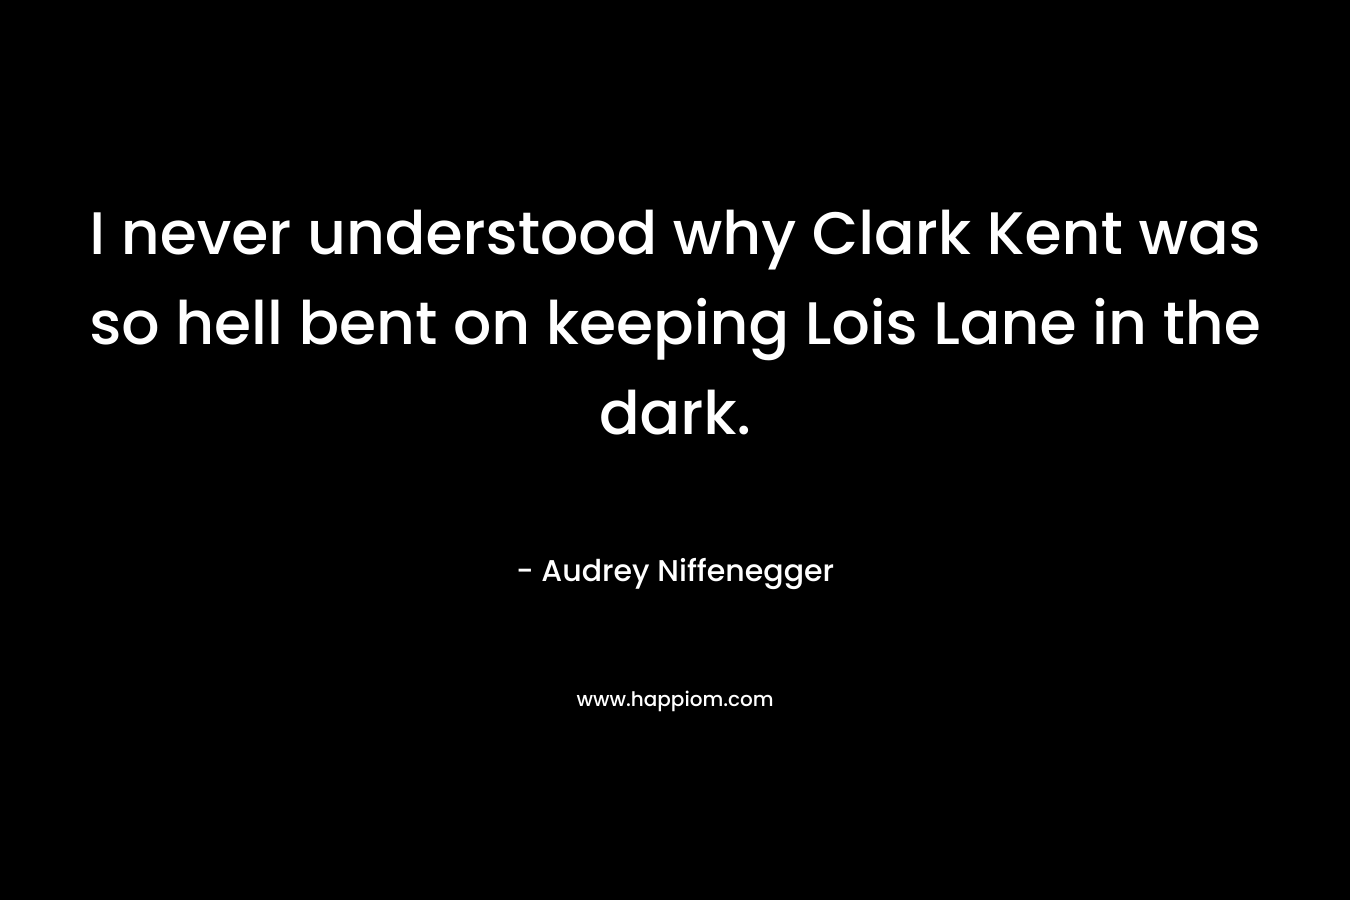 I never understood why Clark Kent was so hell bent on keeping Lois Lane in the dark.